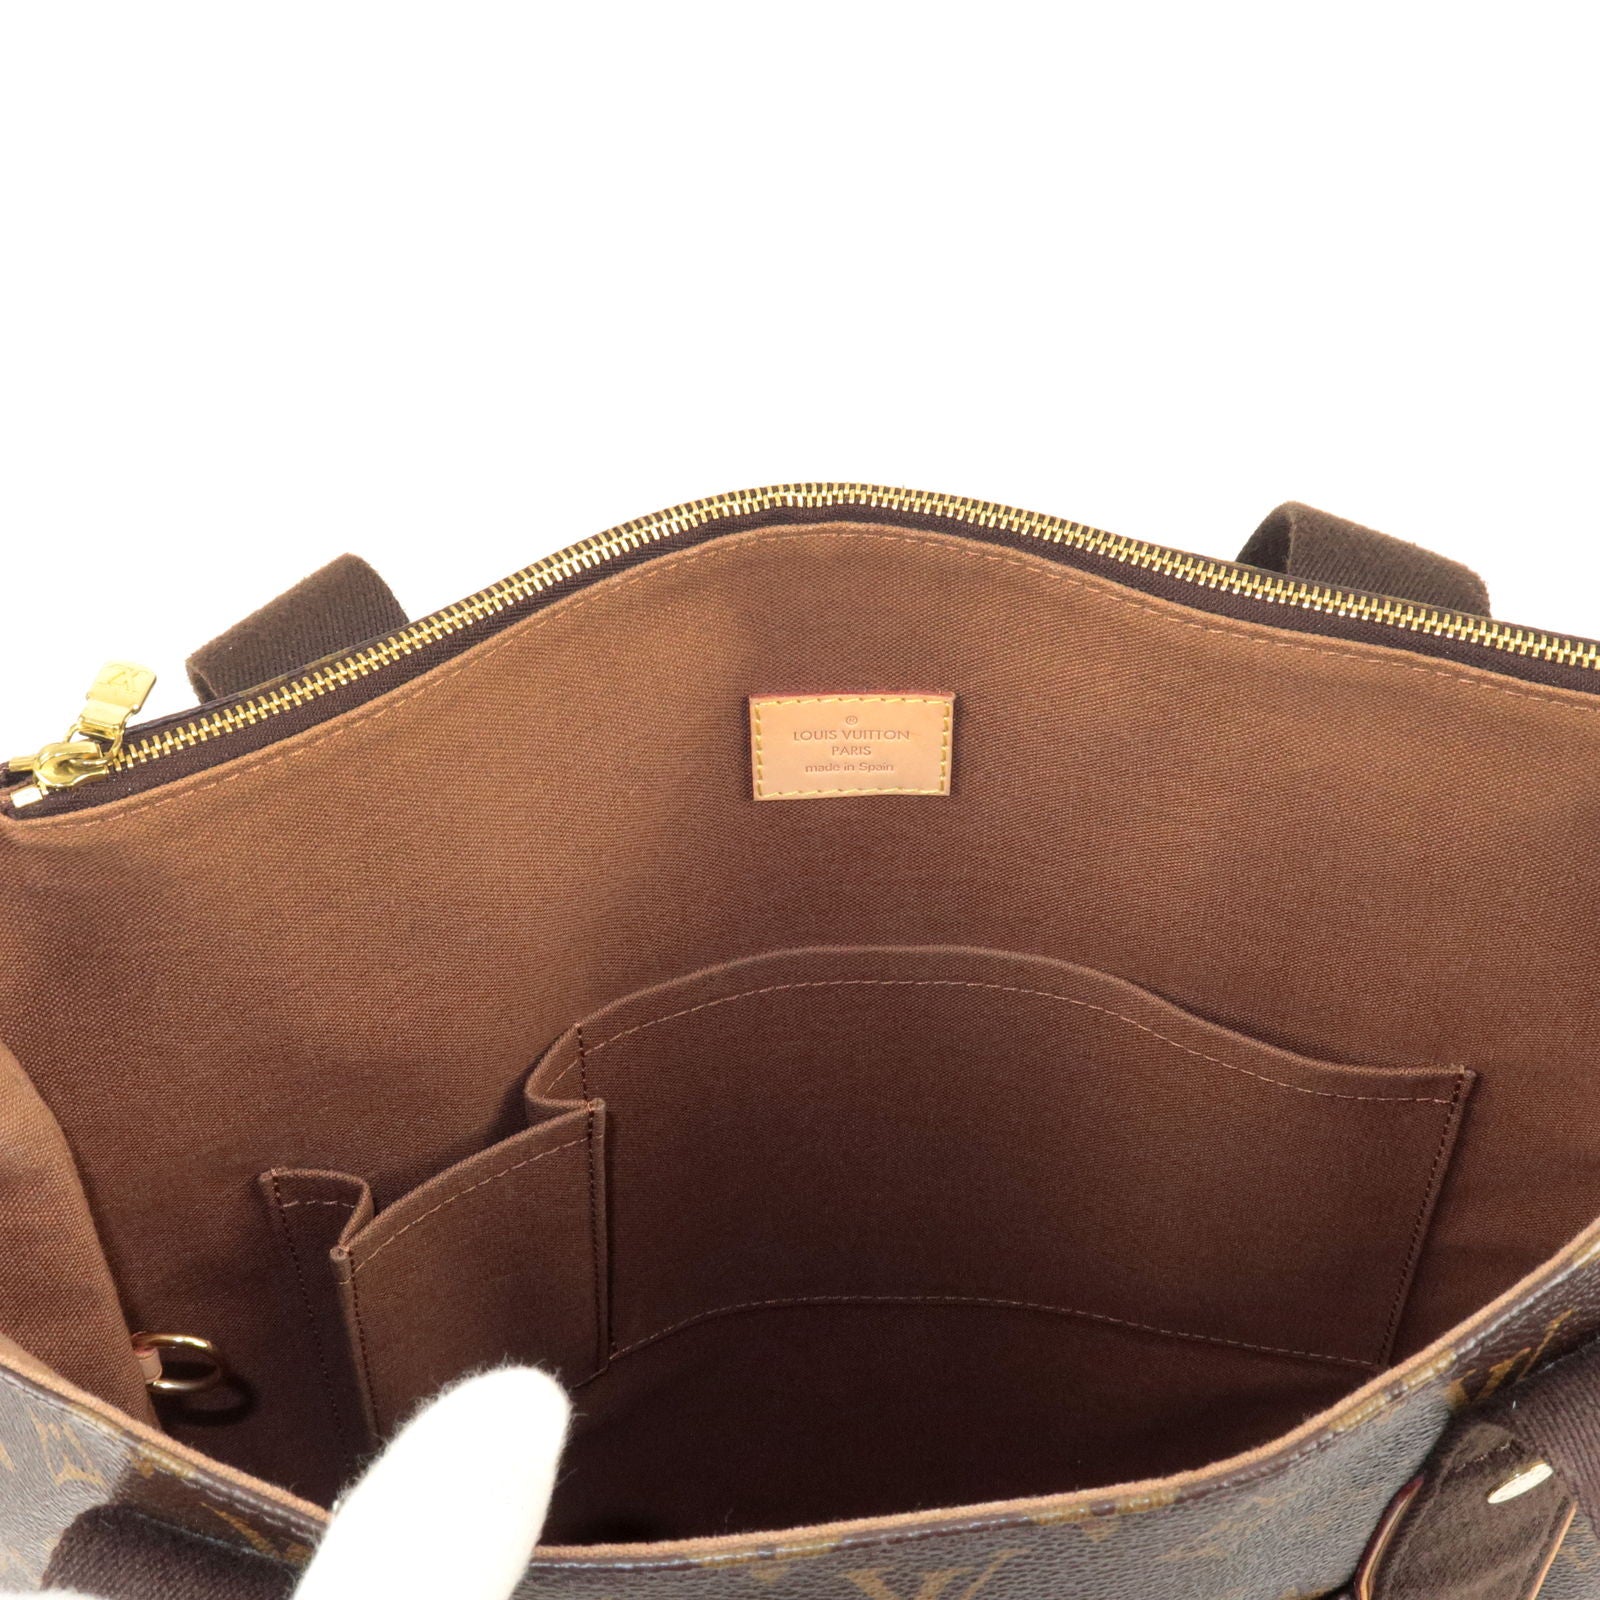 Louis+Vuitton+Cabas+Beaubourg+Tote+Brown+Canvas for sale online